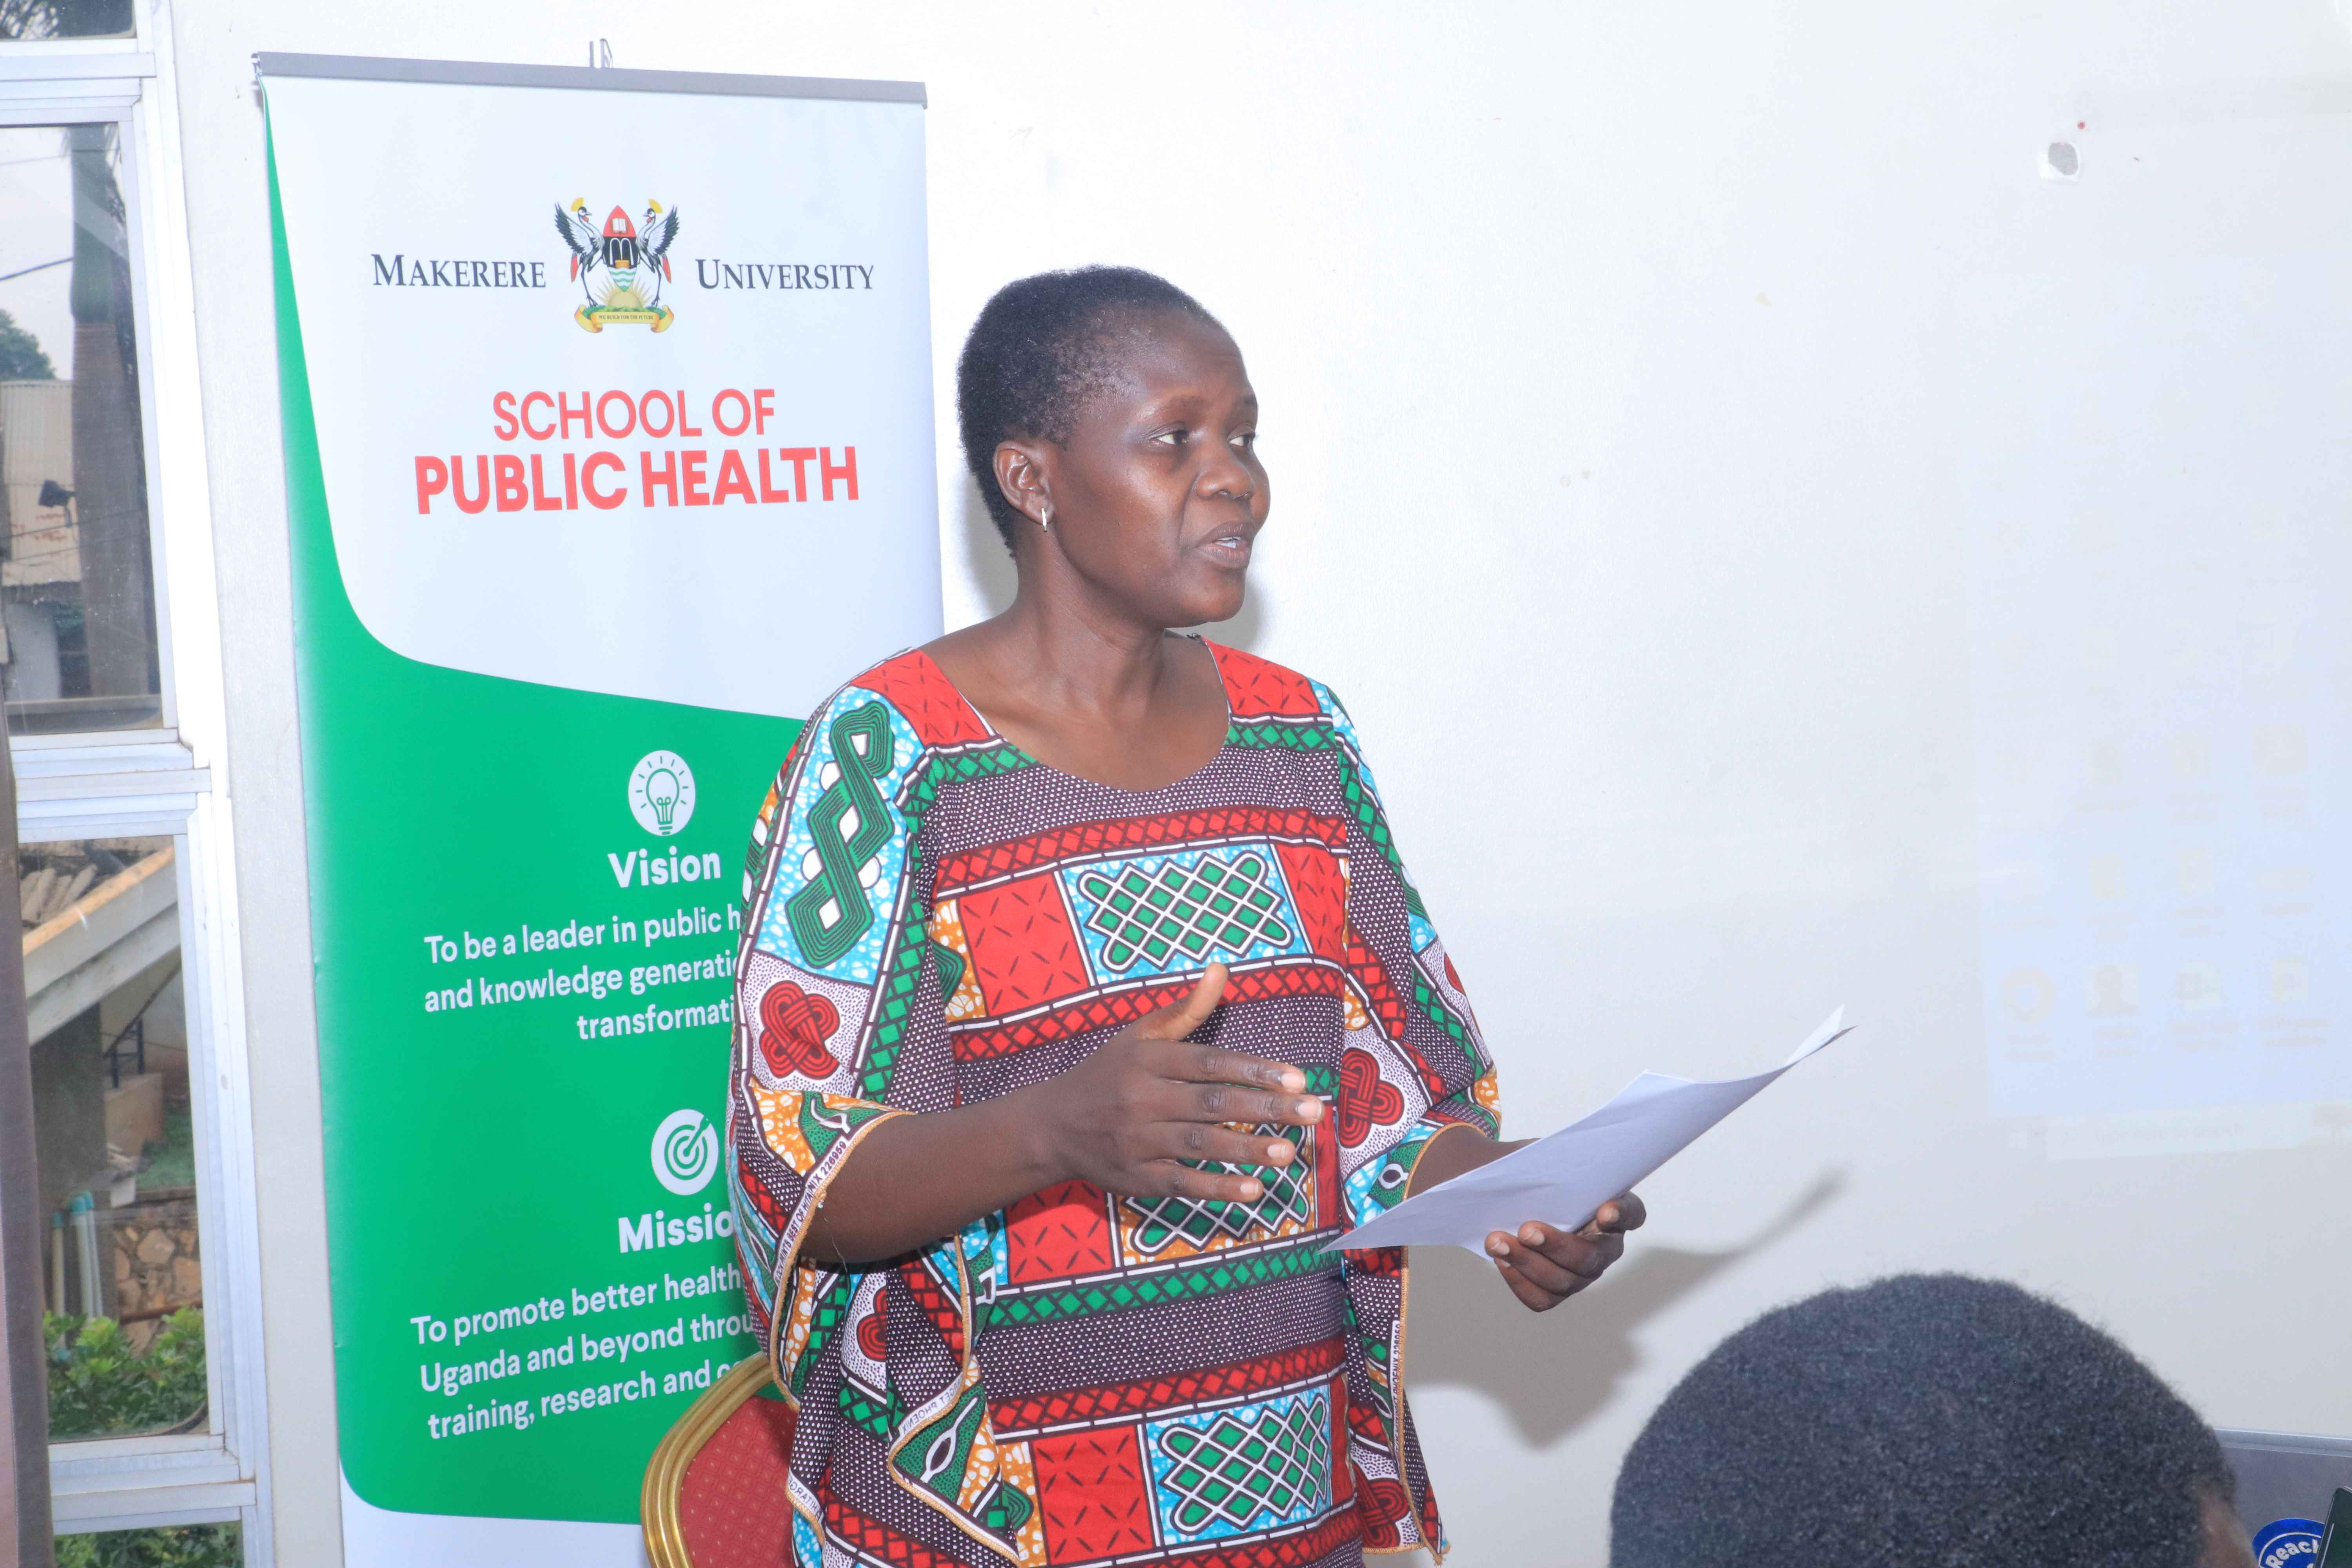 Dr. Dinah Amongin, a health scientist and lecturer at MakSPH, who served as the Principal Investigator of the innovation documentation study speaks during the ceremony.